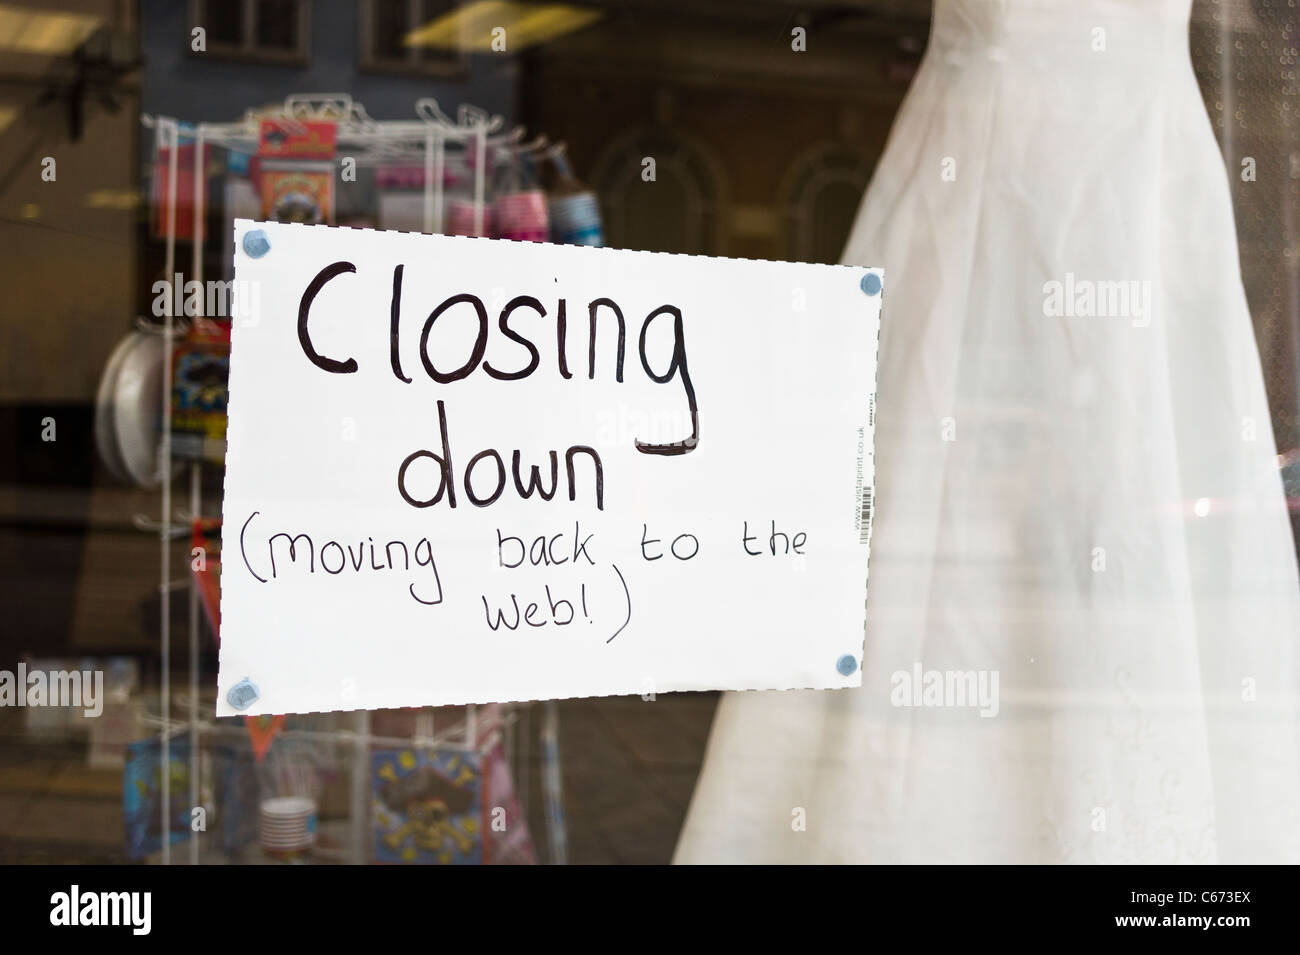 Closing Down notice in English shop window showing change of business strategy Stock Photo